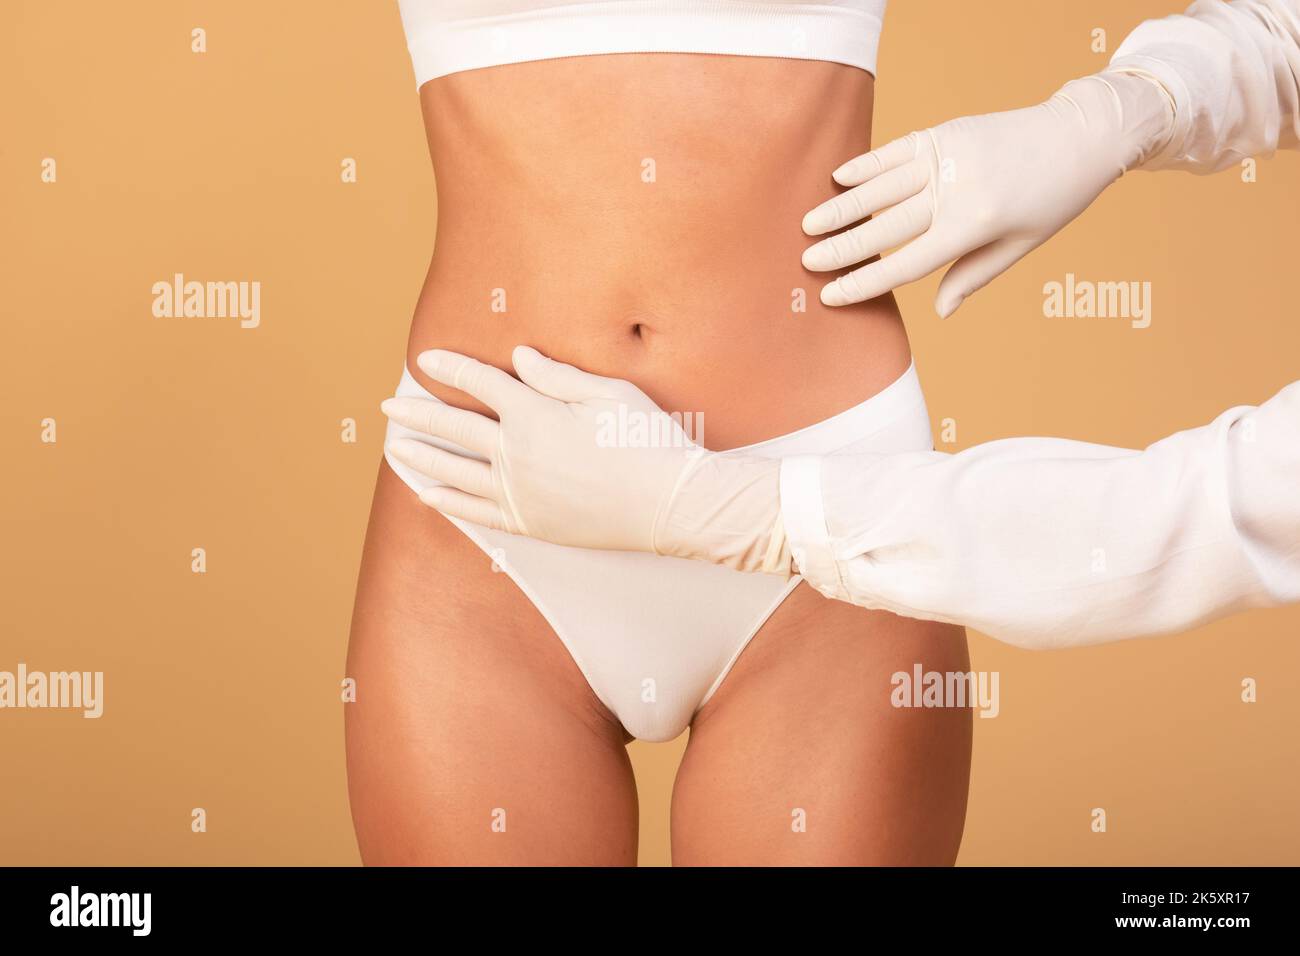 Making perfect body. Lady getting consultation at plastic surgery clinic, closeup view of abdomen and doctor's hands Stock Photo